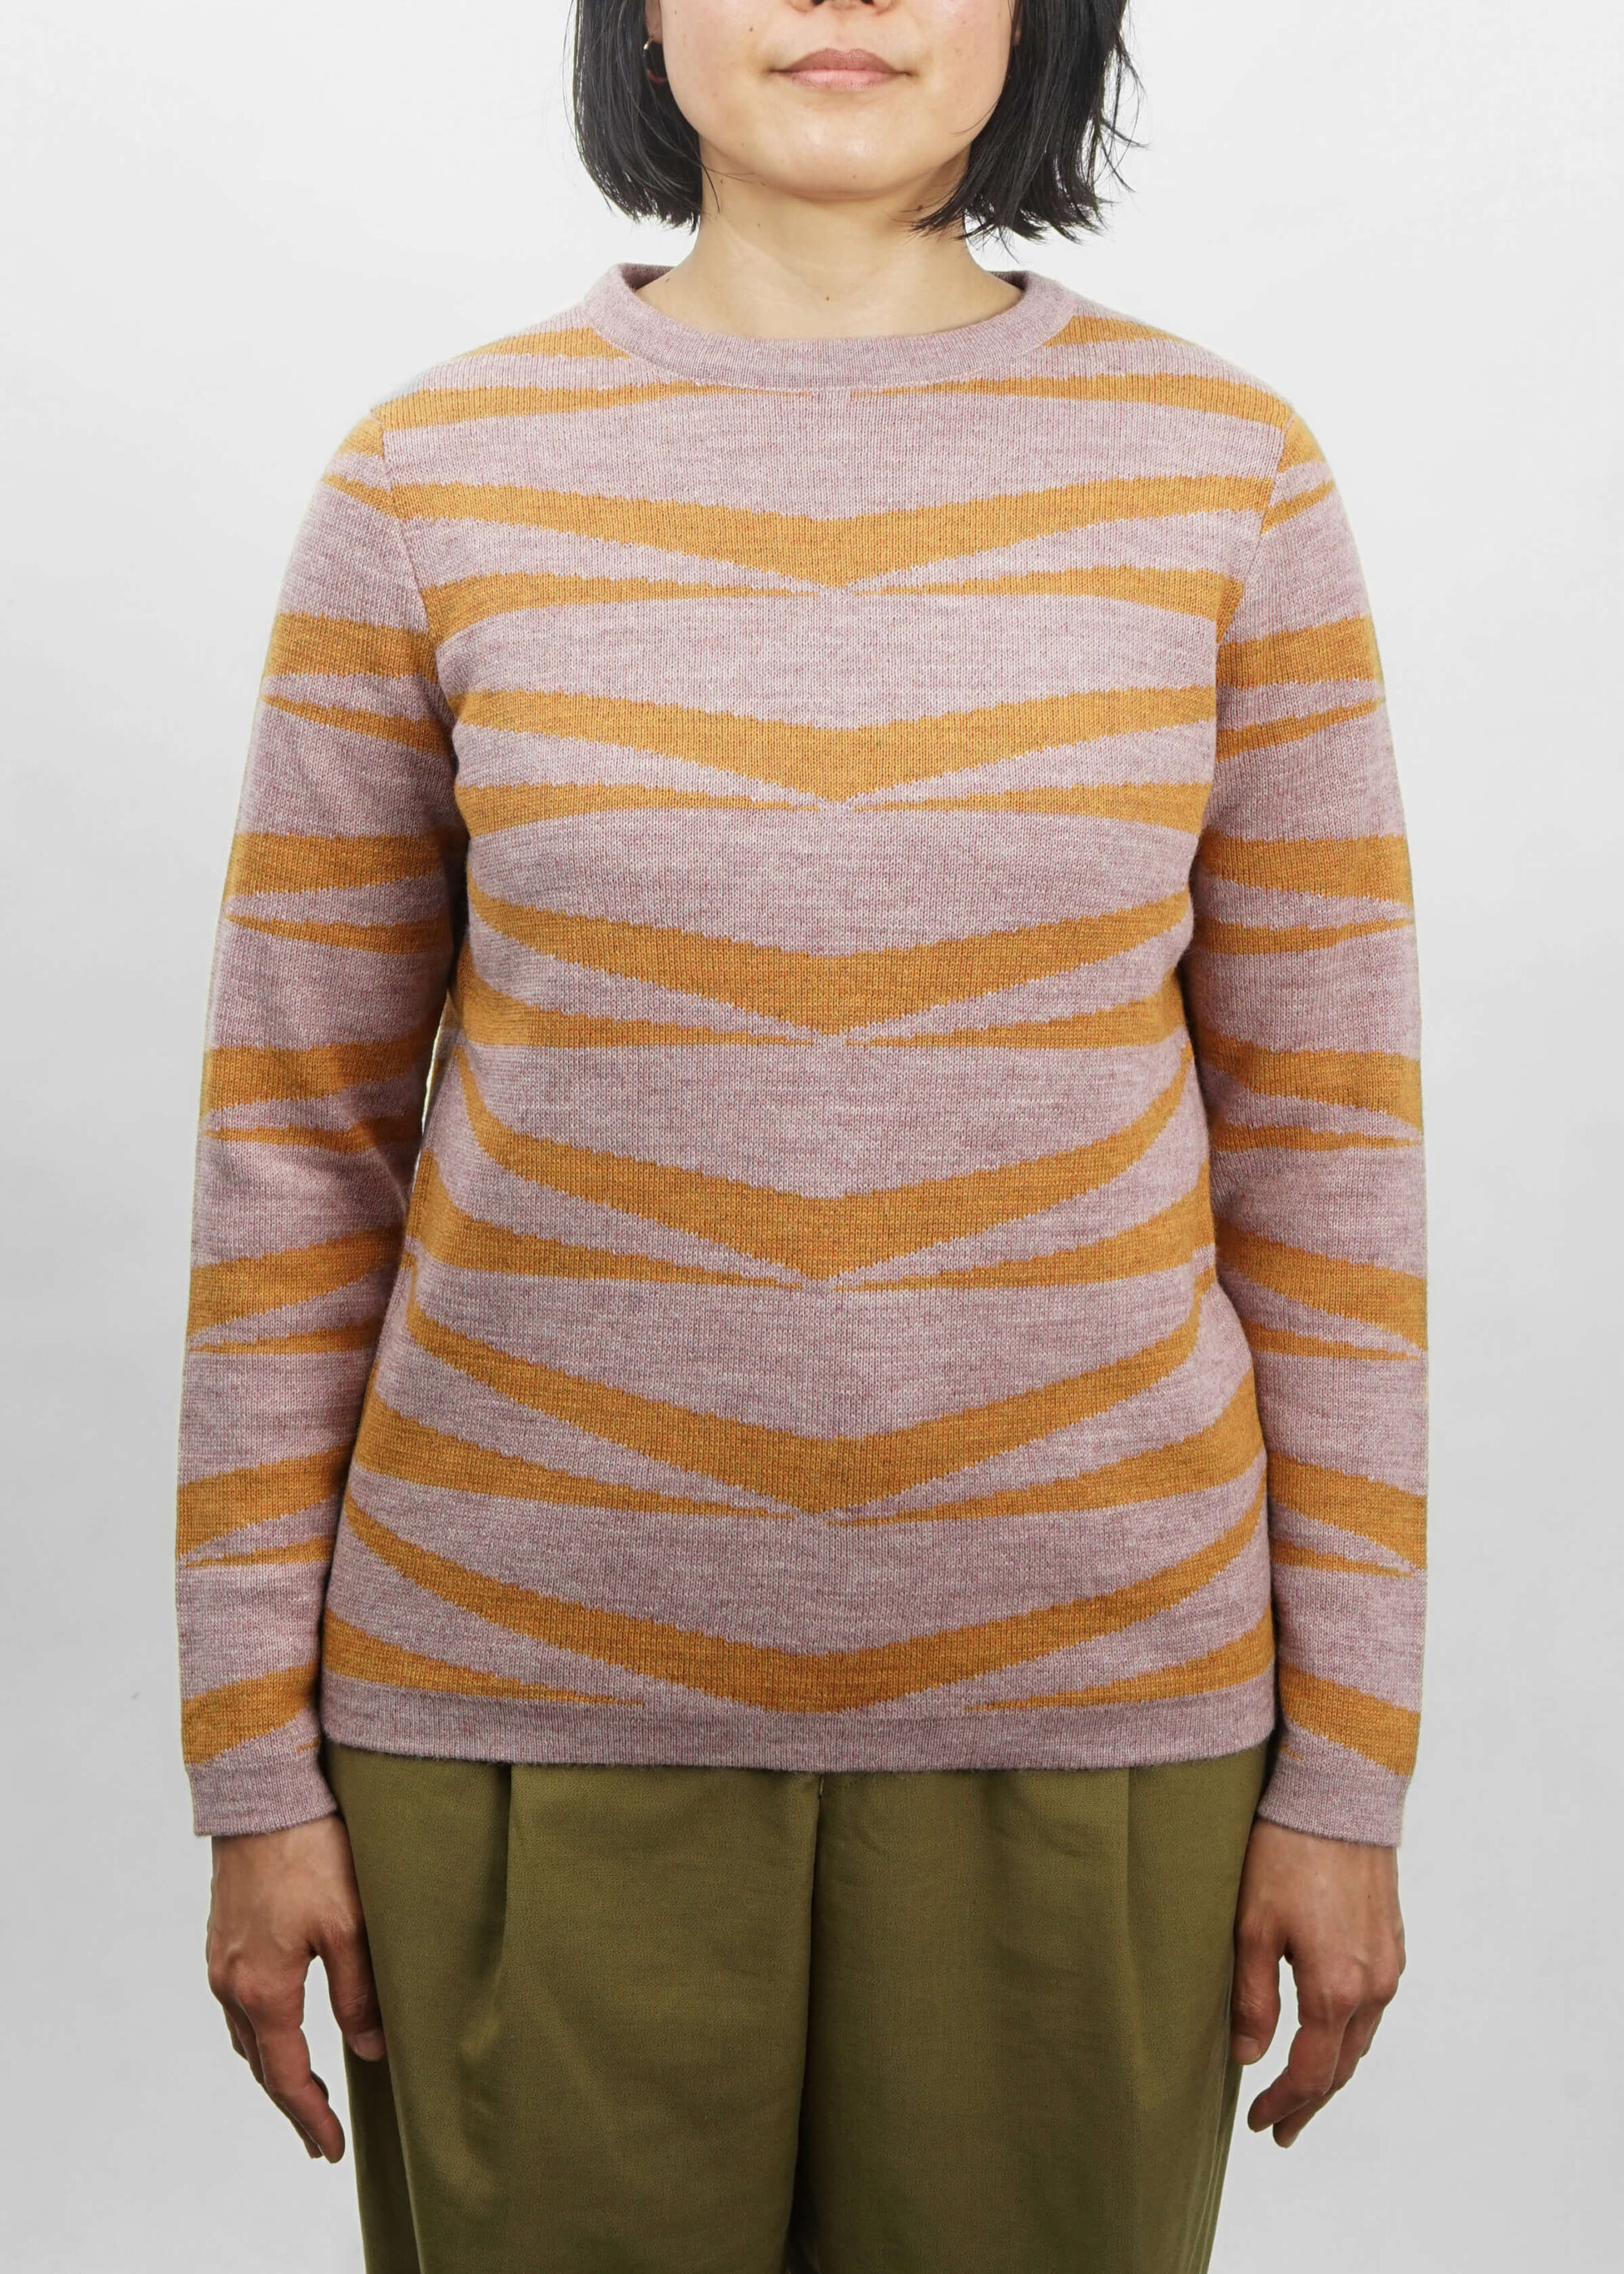 Product image for »Inti« Pale Pink Yellow Sweater Baby Alpaca